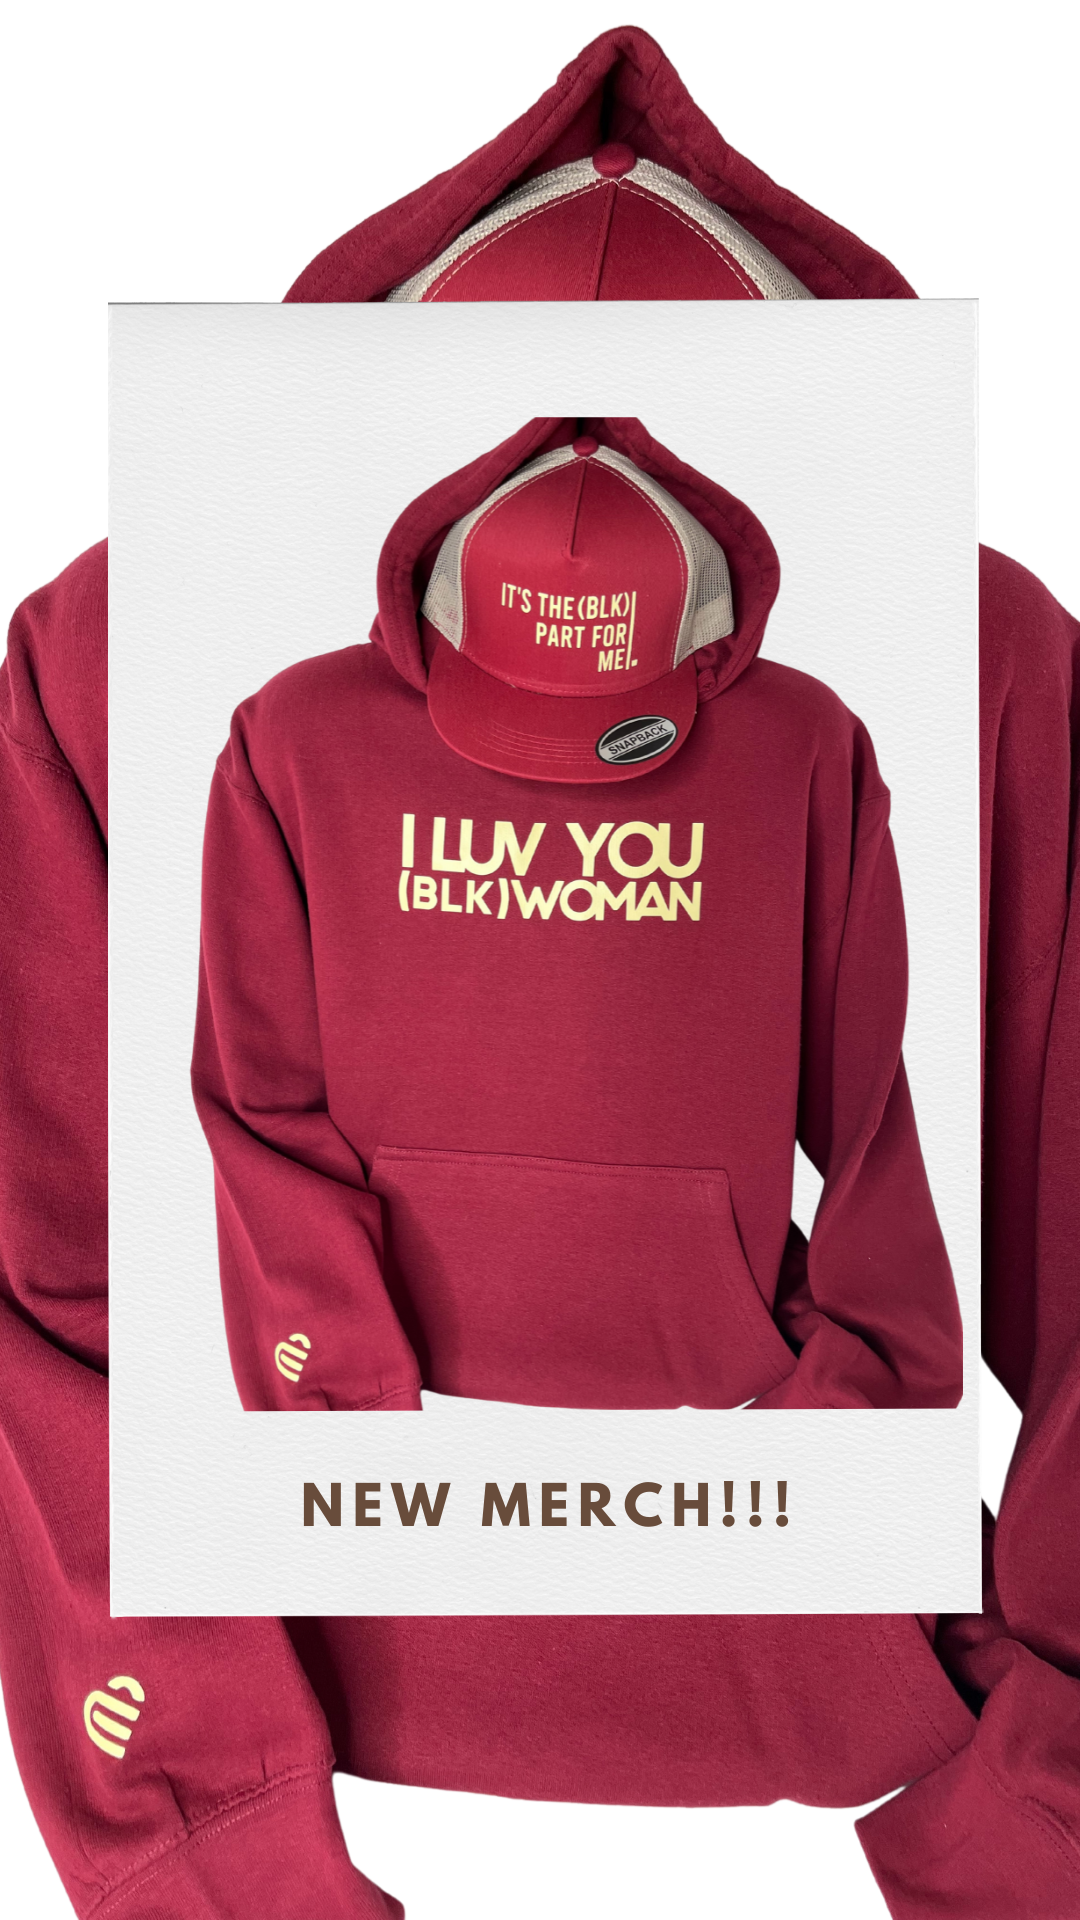 Cranberry & Dressing I LUV YOU (BLK) WOMAN & (BLK) MAN Hoodie